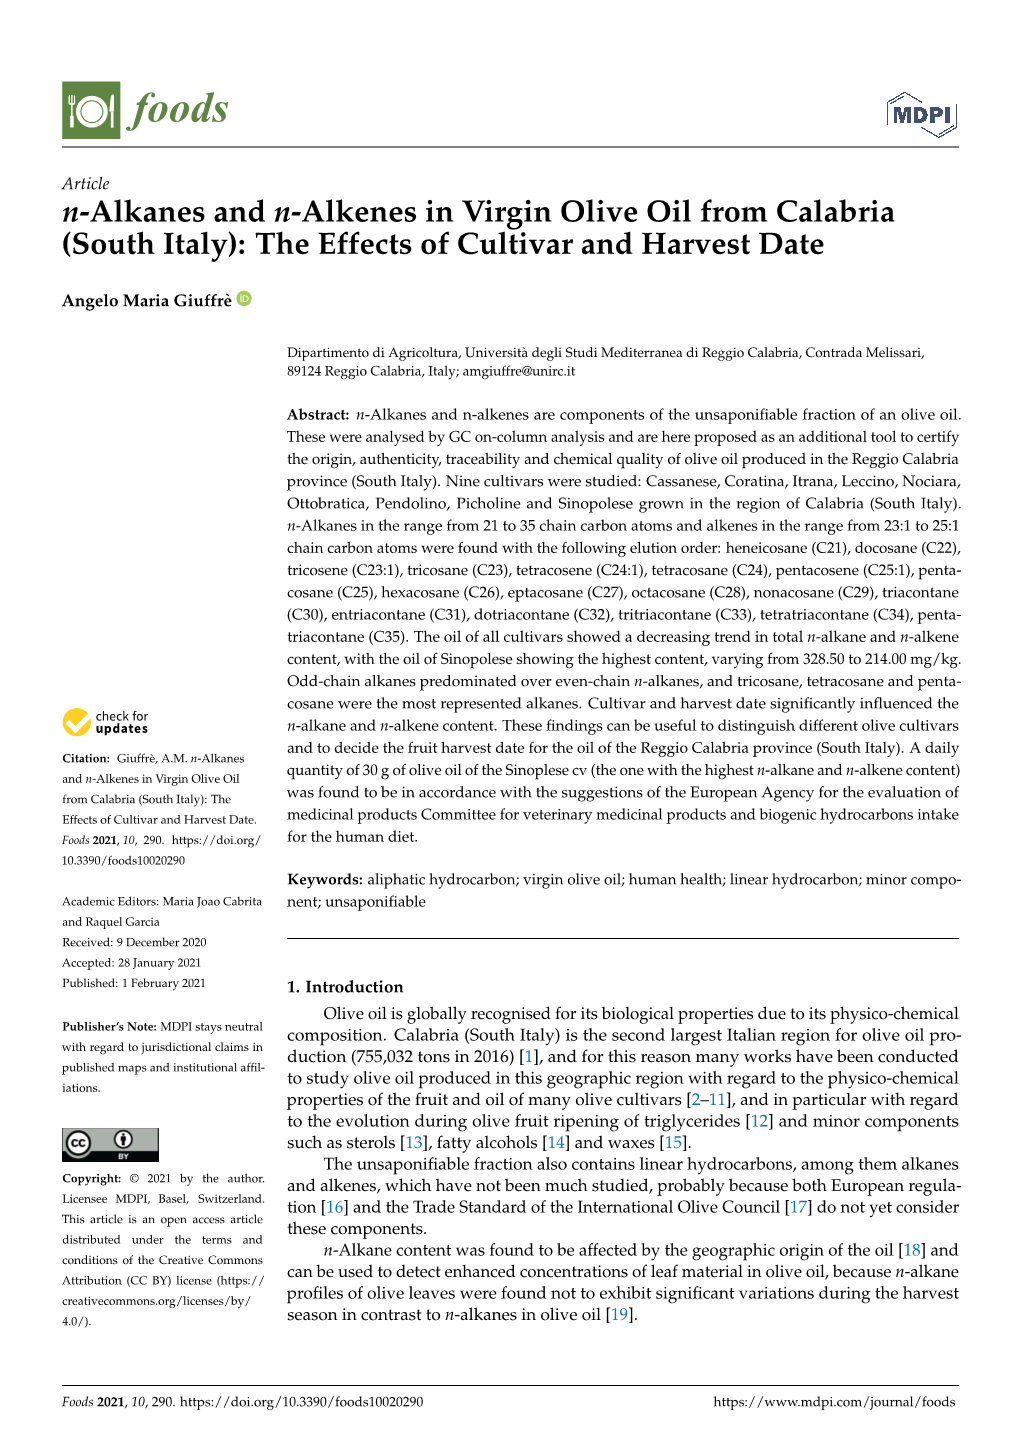 N-Alkanes and N-Alkenes in Virgin Olive Oil from Calabria (South Italy): the Effects of Cultivar and Harvest Date